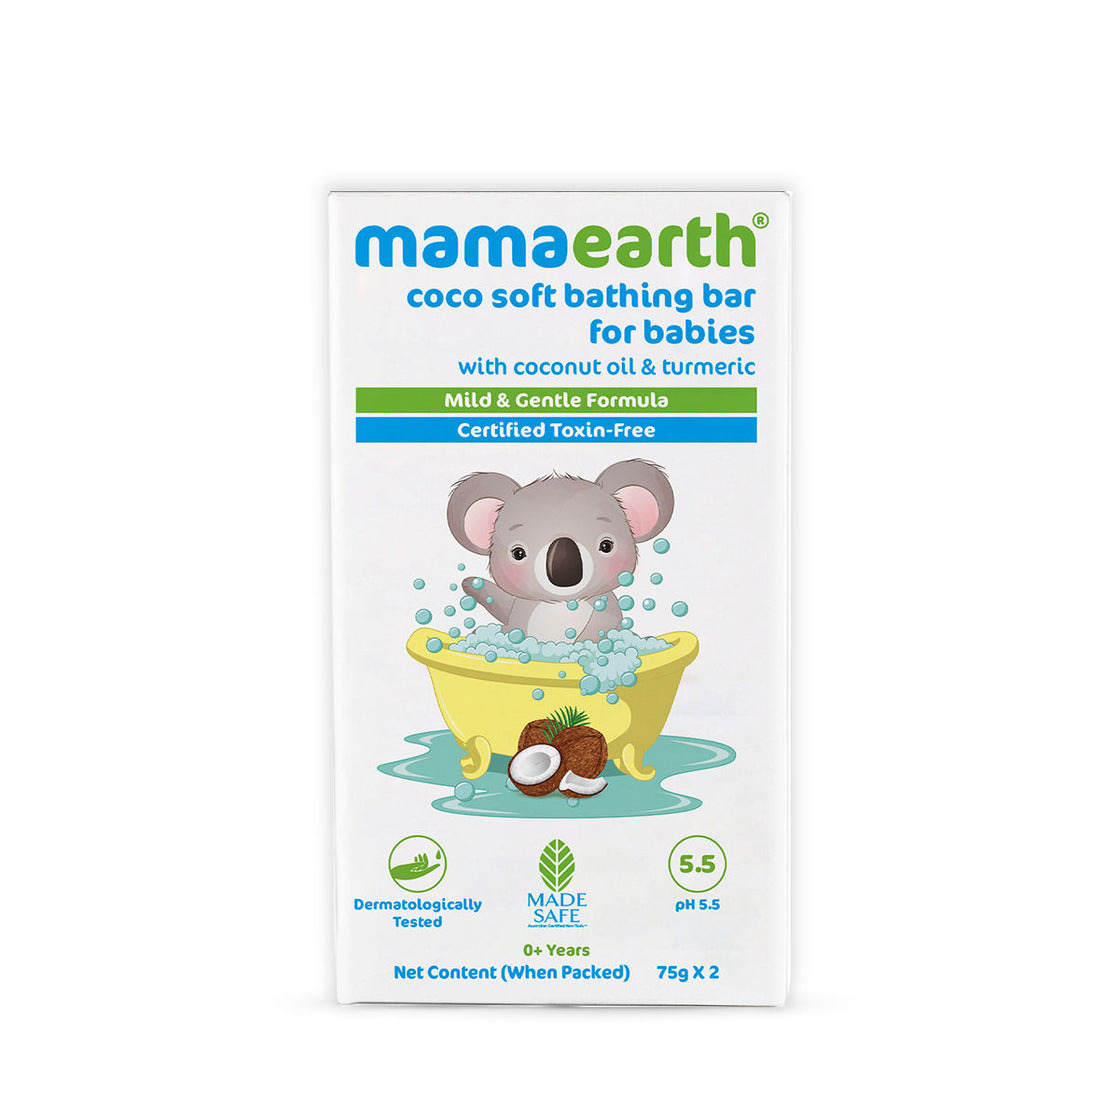 Mamaearth Coco Soft Bathing Bar For Babies Ph 5.5 (Pack Of 2)